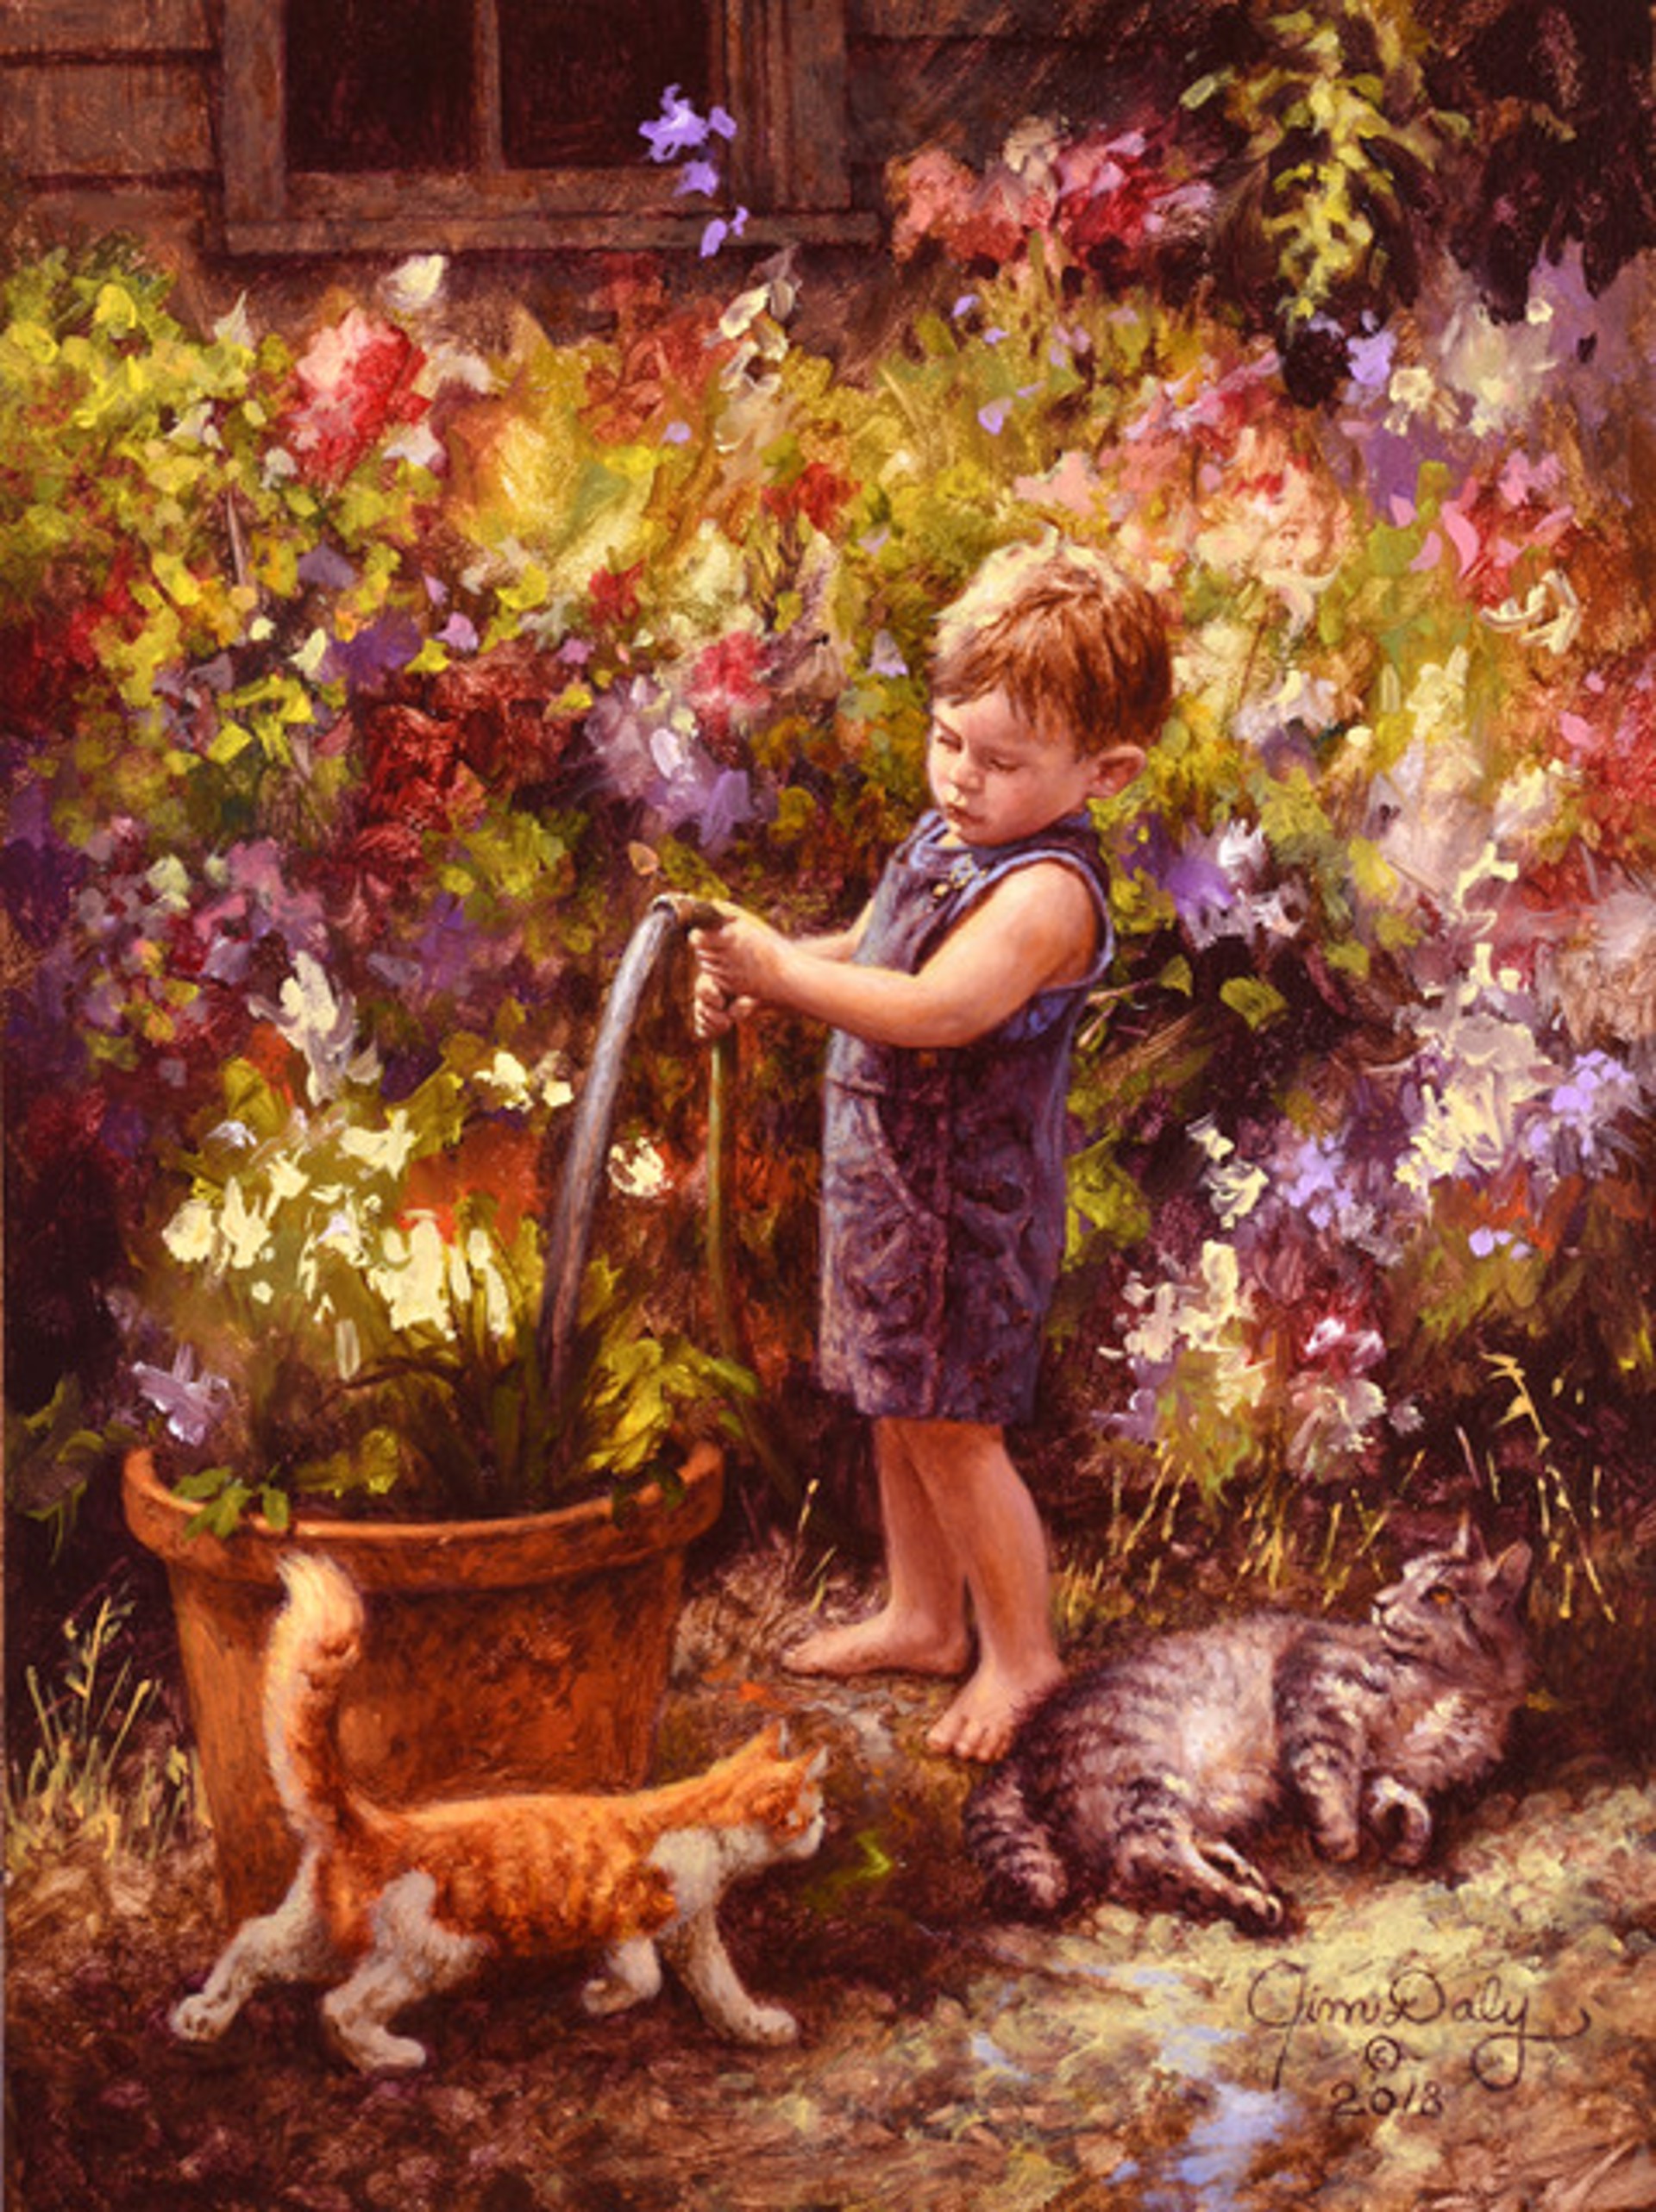 Garden Helpers by Jim Daly